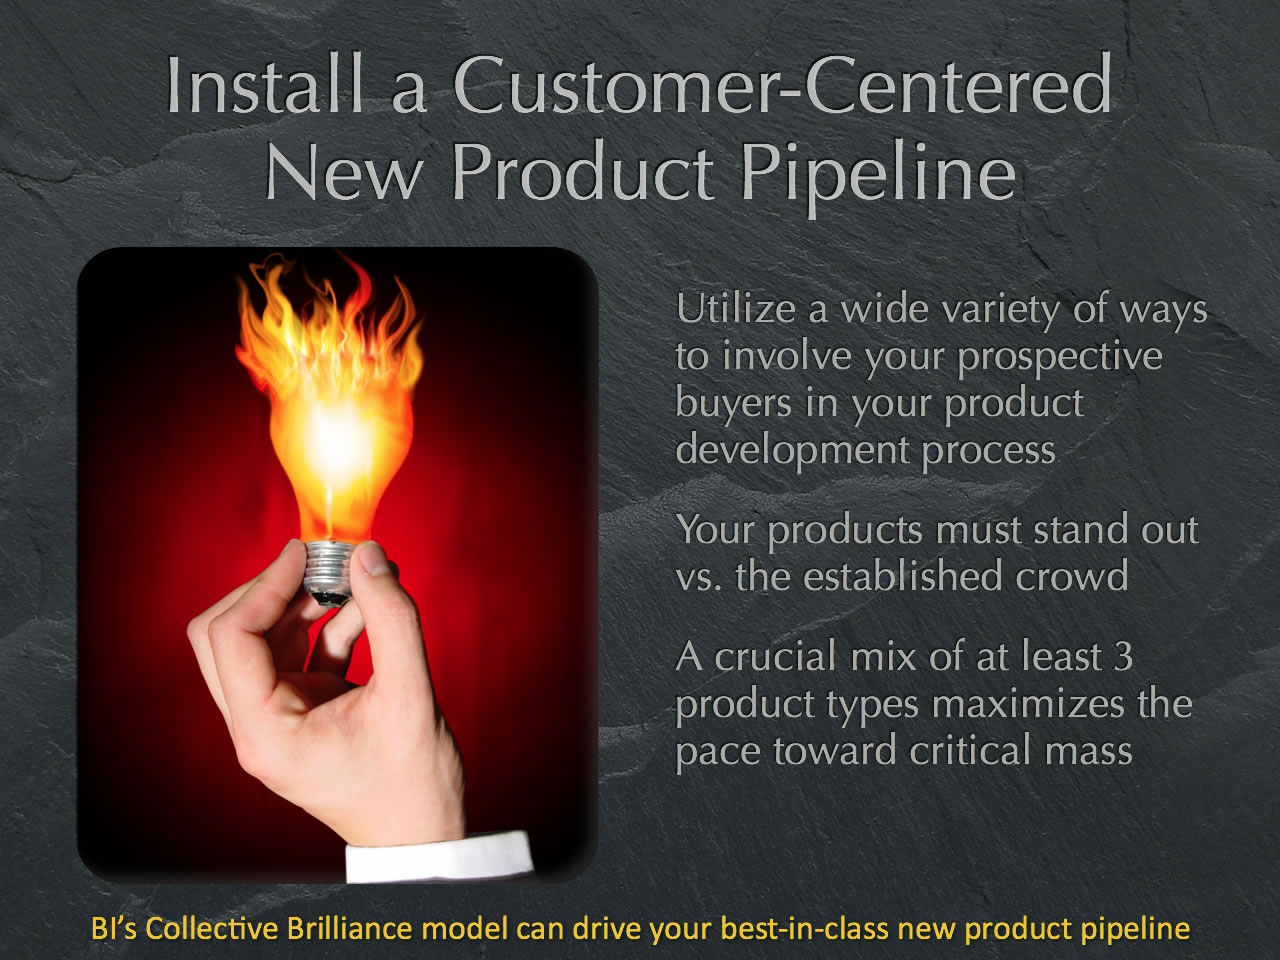 Install a customer-centererd new product pipeline to develop additional investing and trading products to sell